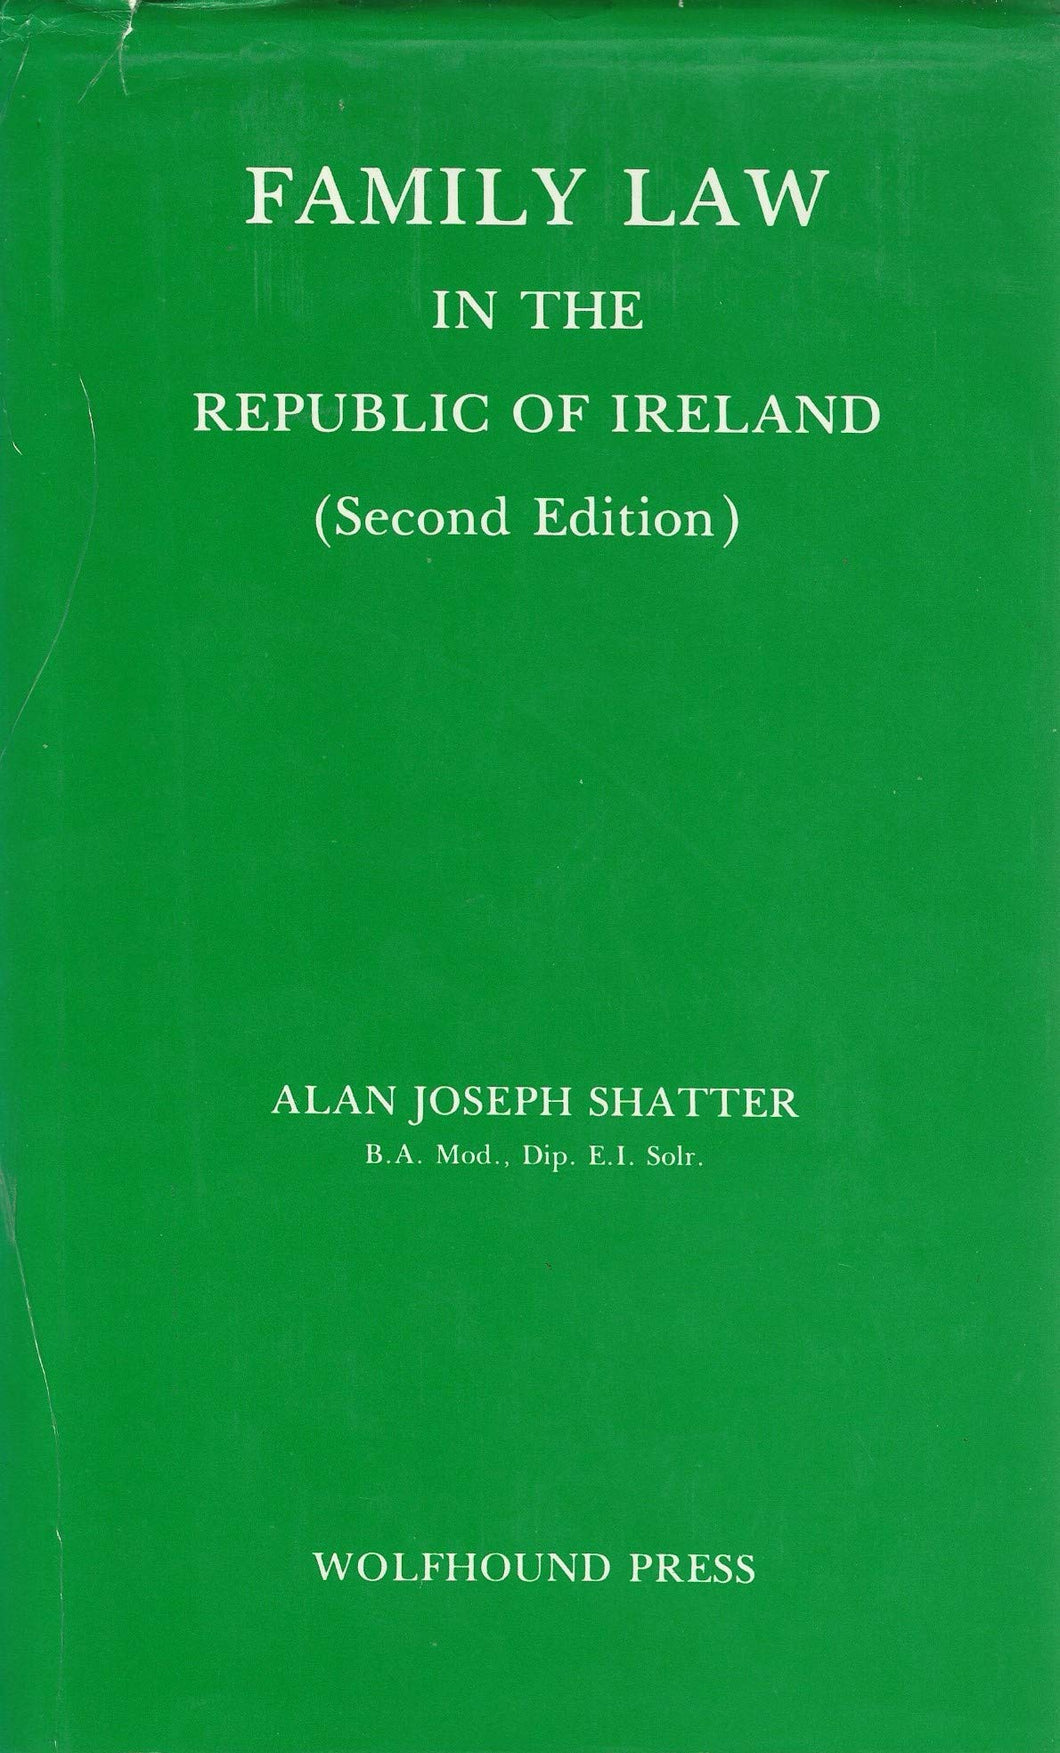 Family Law in the Republic of Ireland